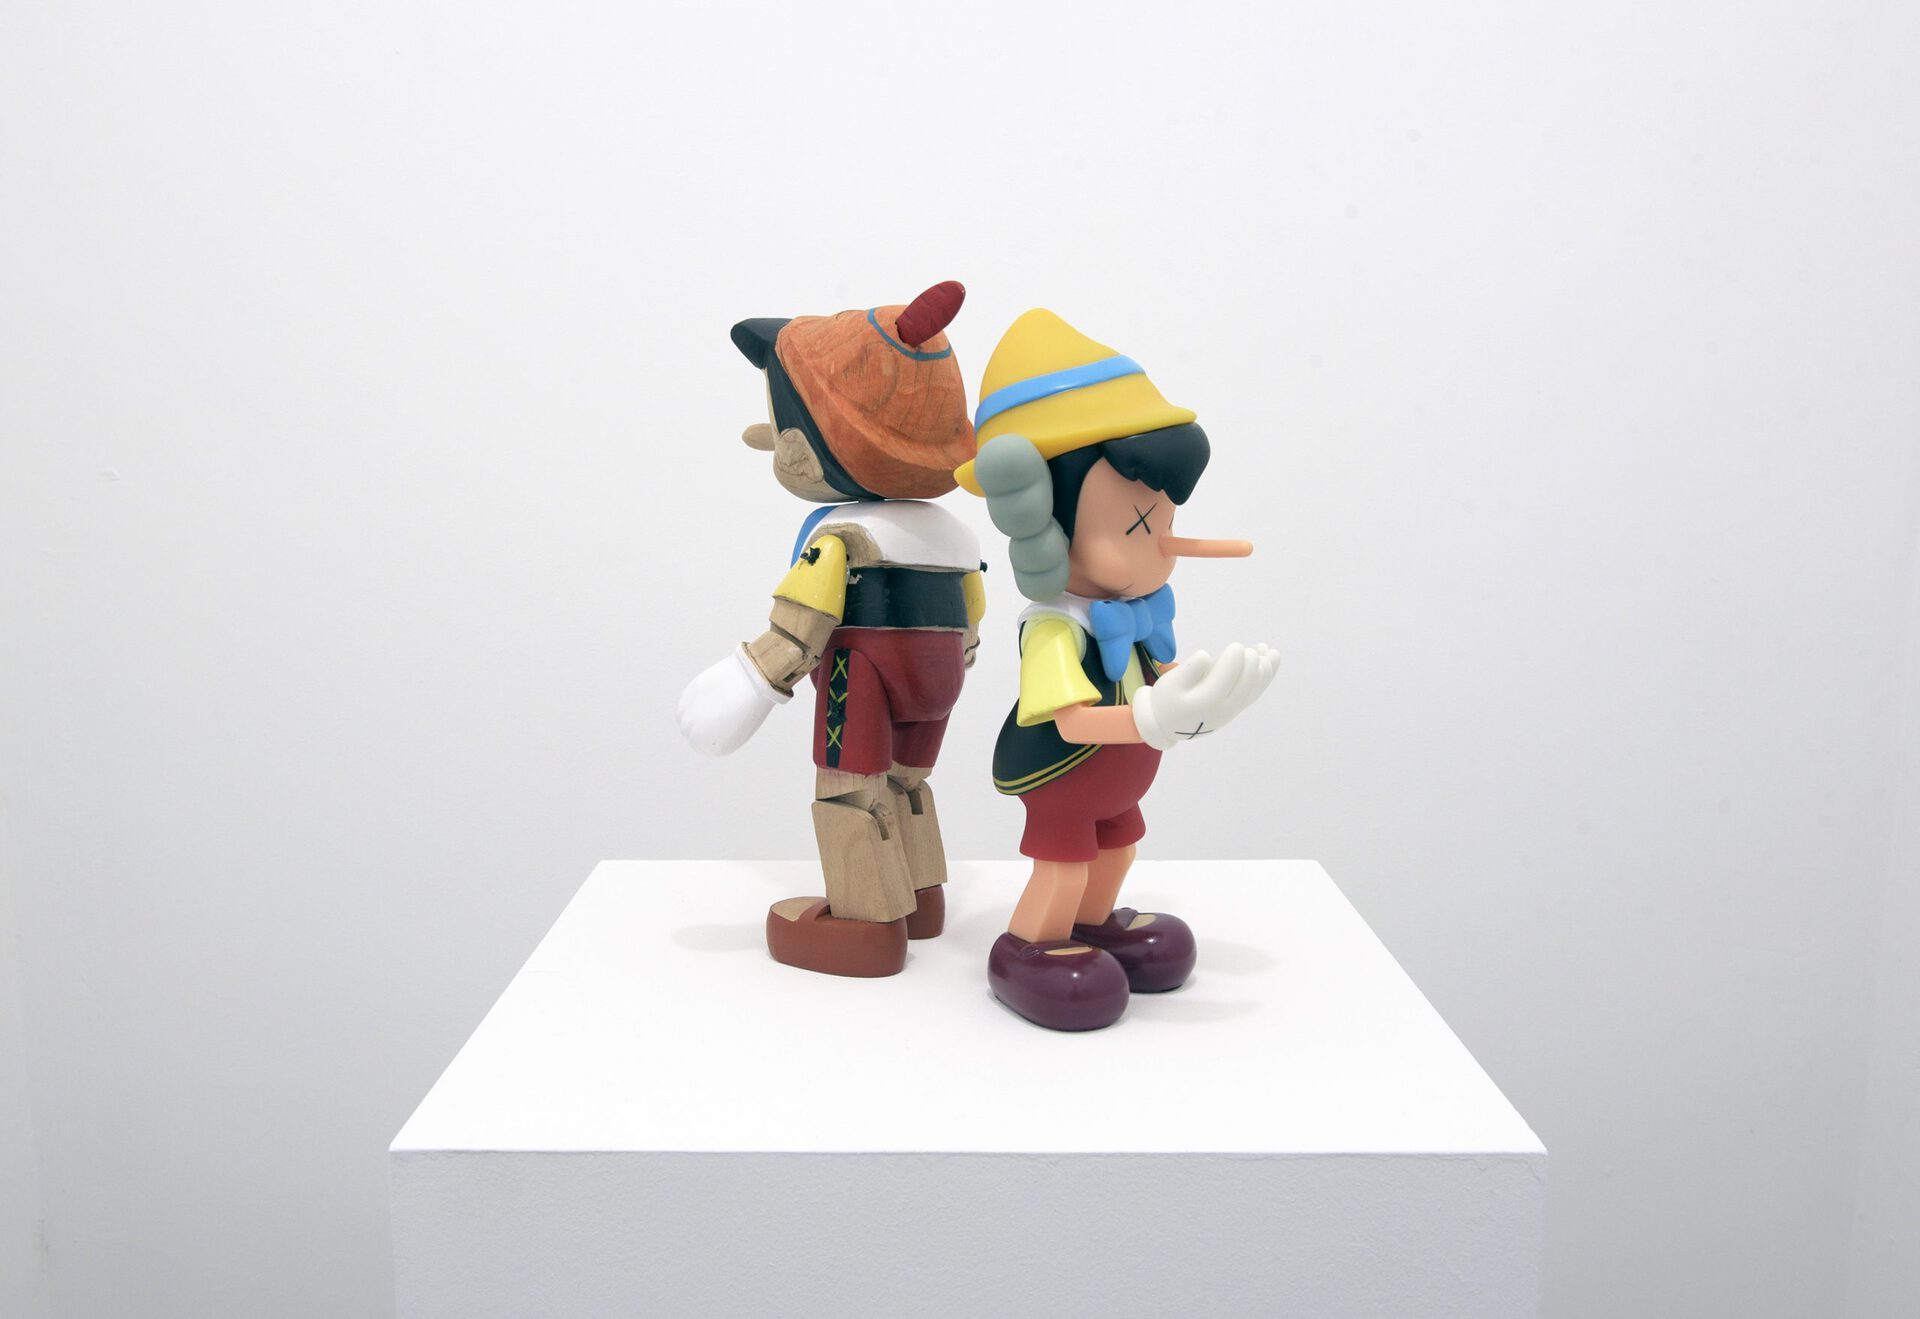 Marek Wolfryd, I think I see you brother but the mist is thick 2020 KAWS vinyl Pinocchio collectable toy and wood Pinocchio puppet by unknown artist 29 x 29 x 17 cm.